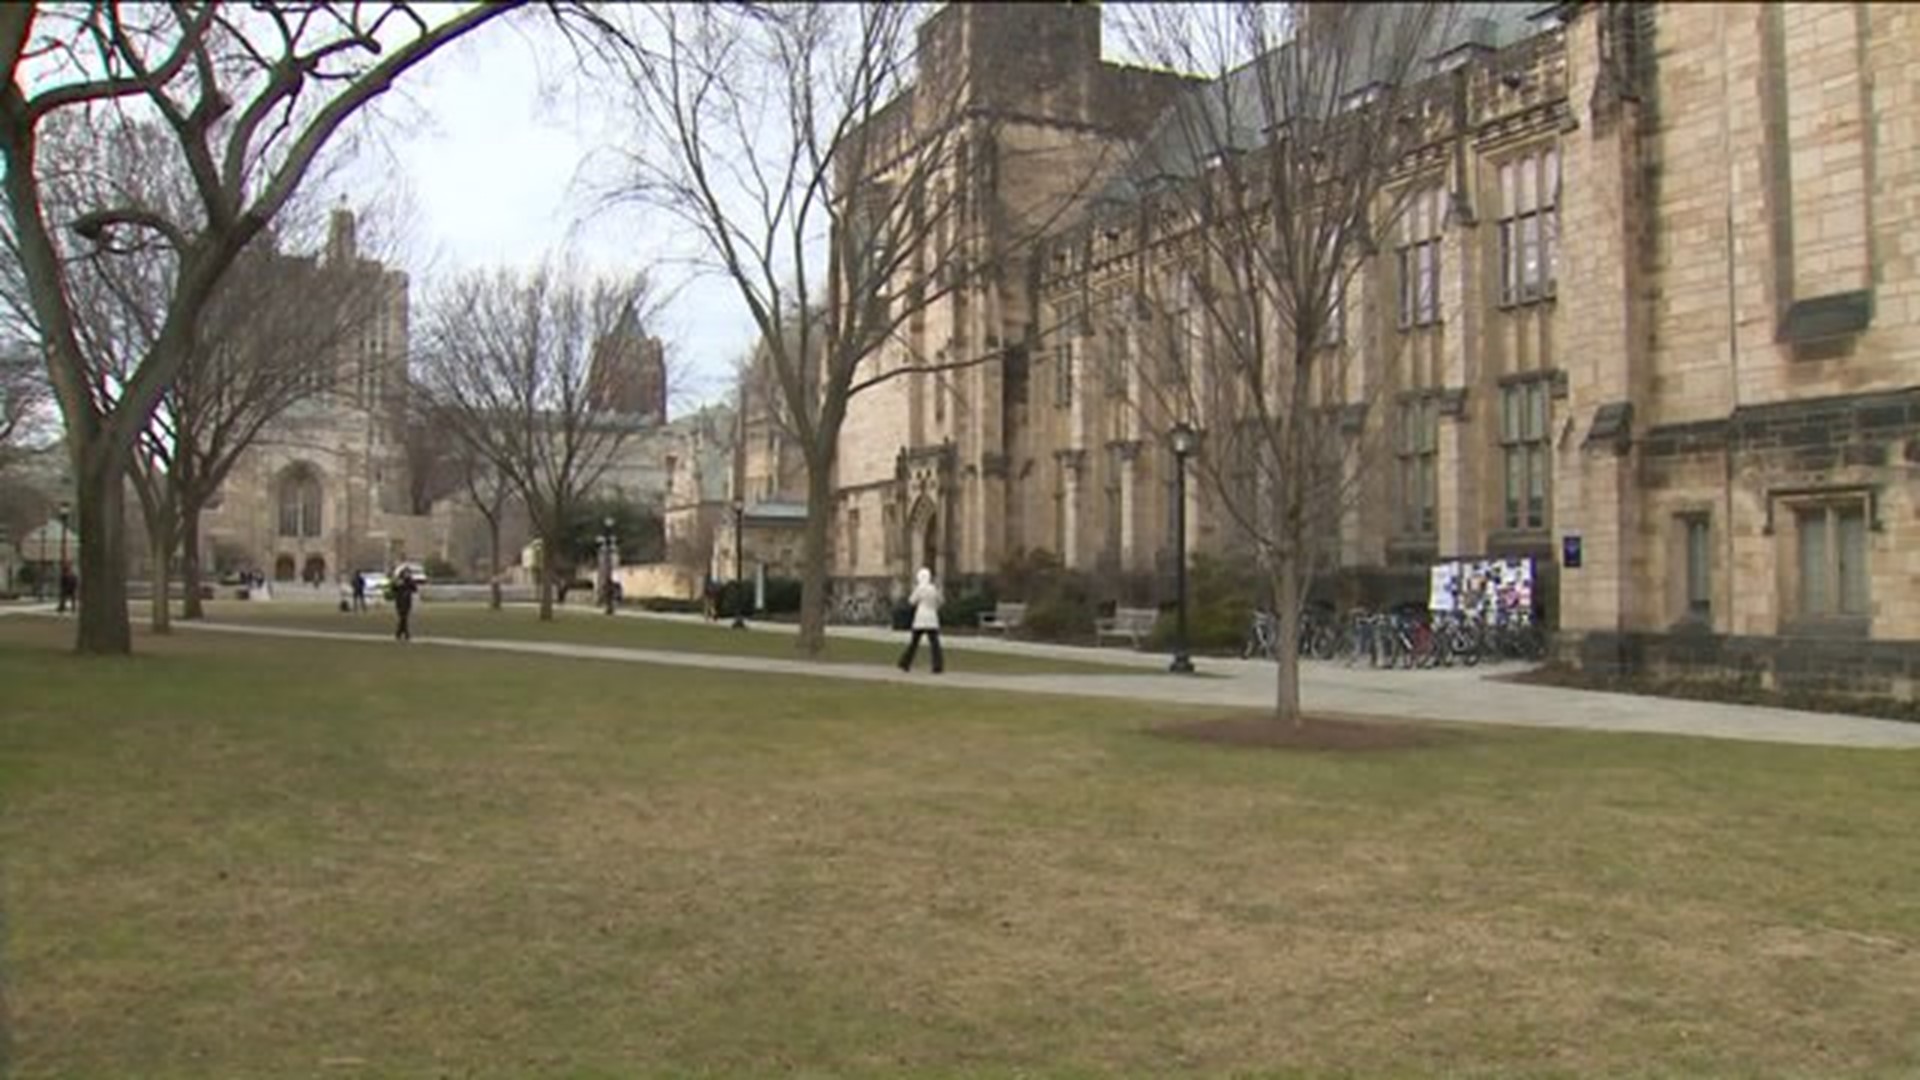 College students react to immigration ban